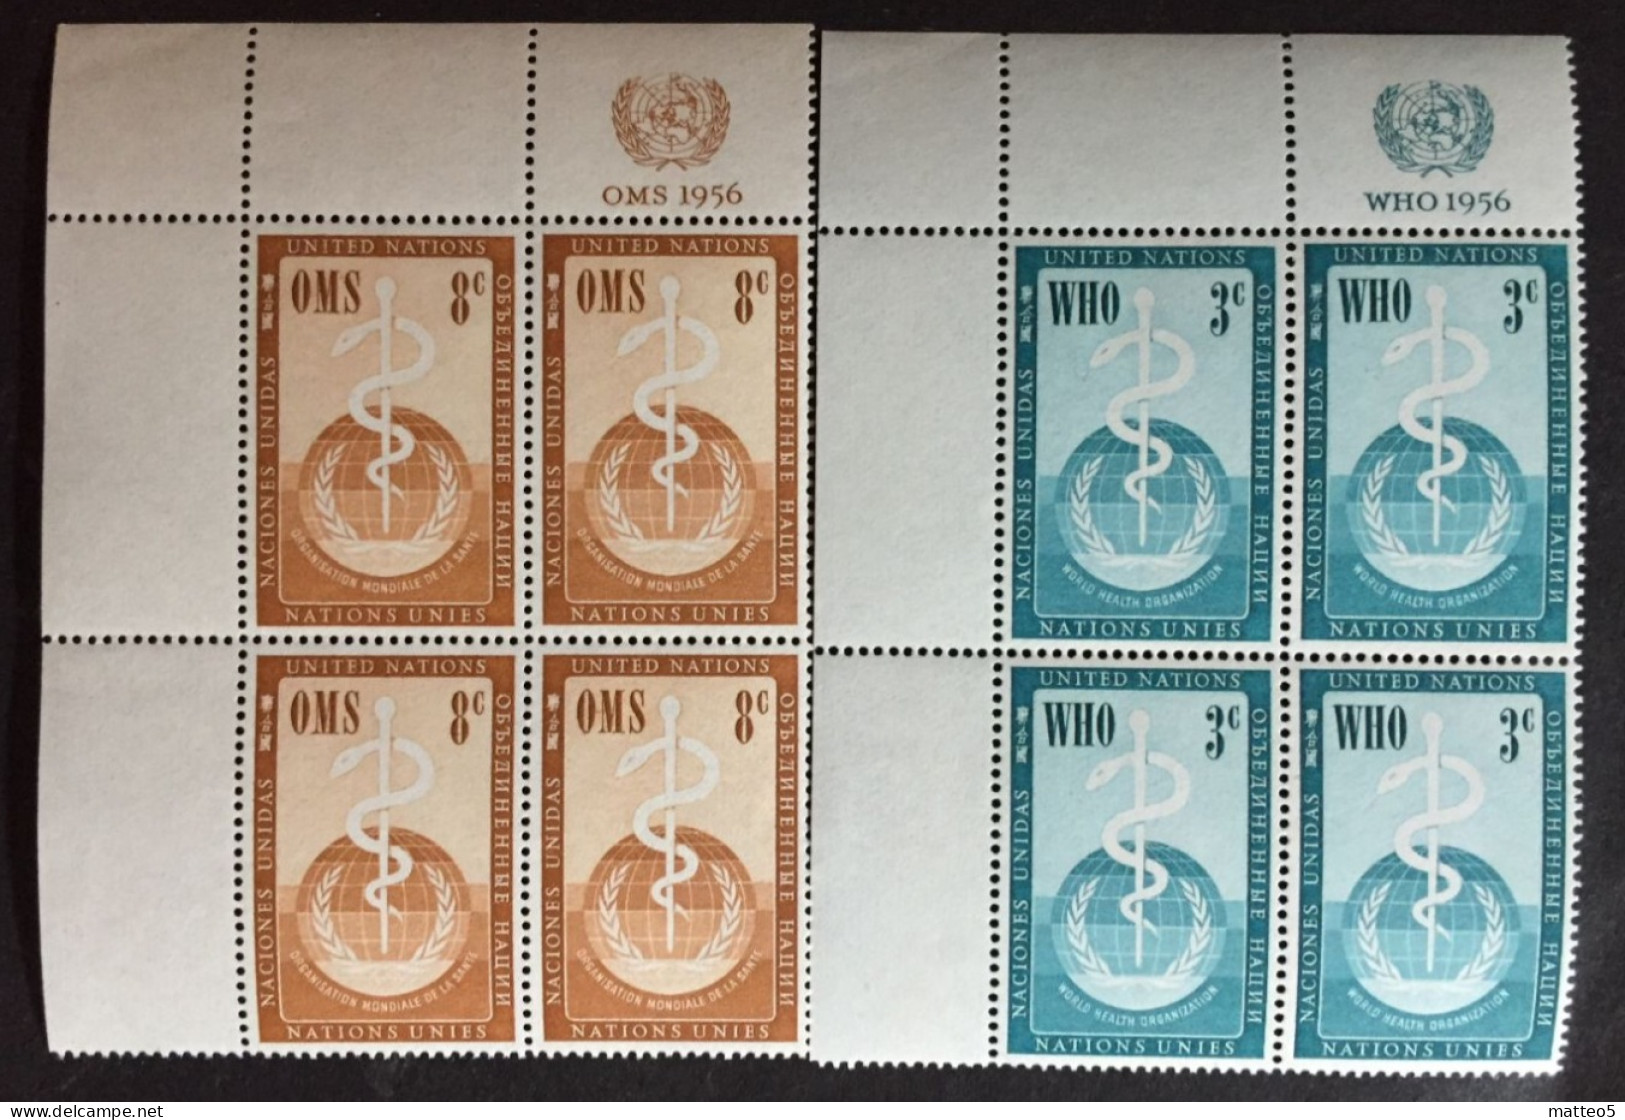 1955 - United Nations UNO UN - W.H.O. - OMS - World Heath Organization - Aesculapian Staff - 2x4 Stamps Unused - Unused Stamps